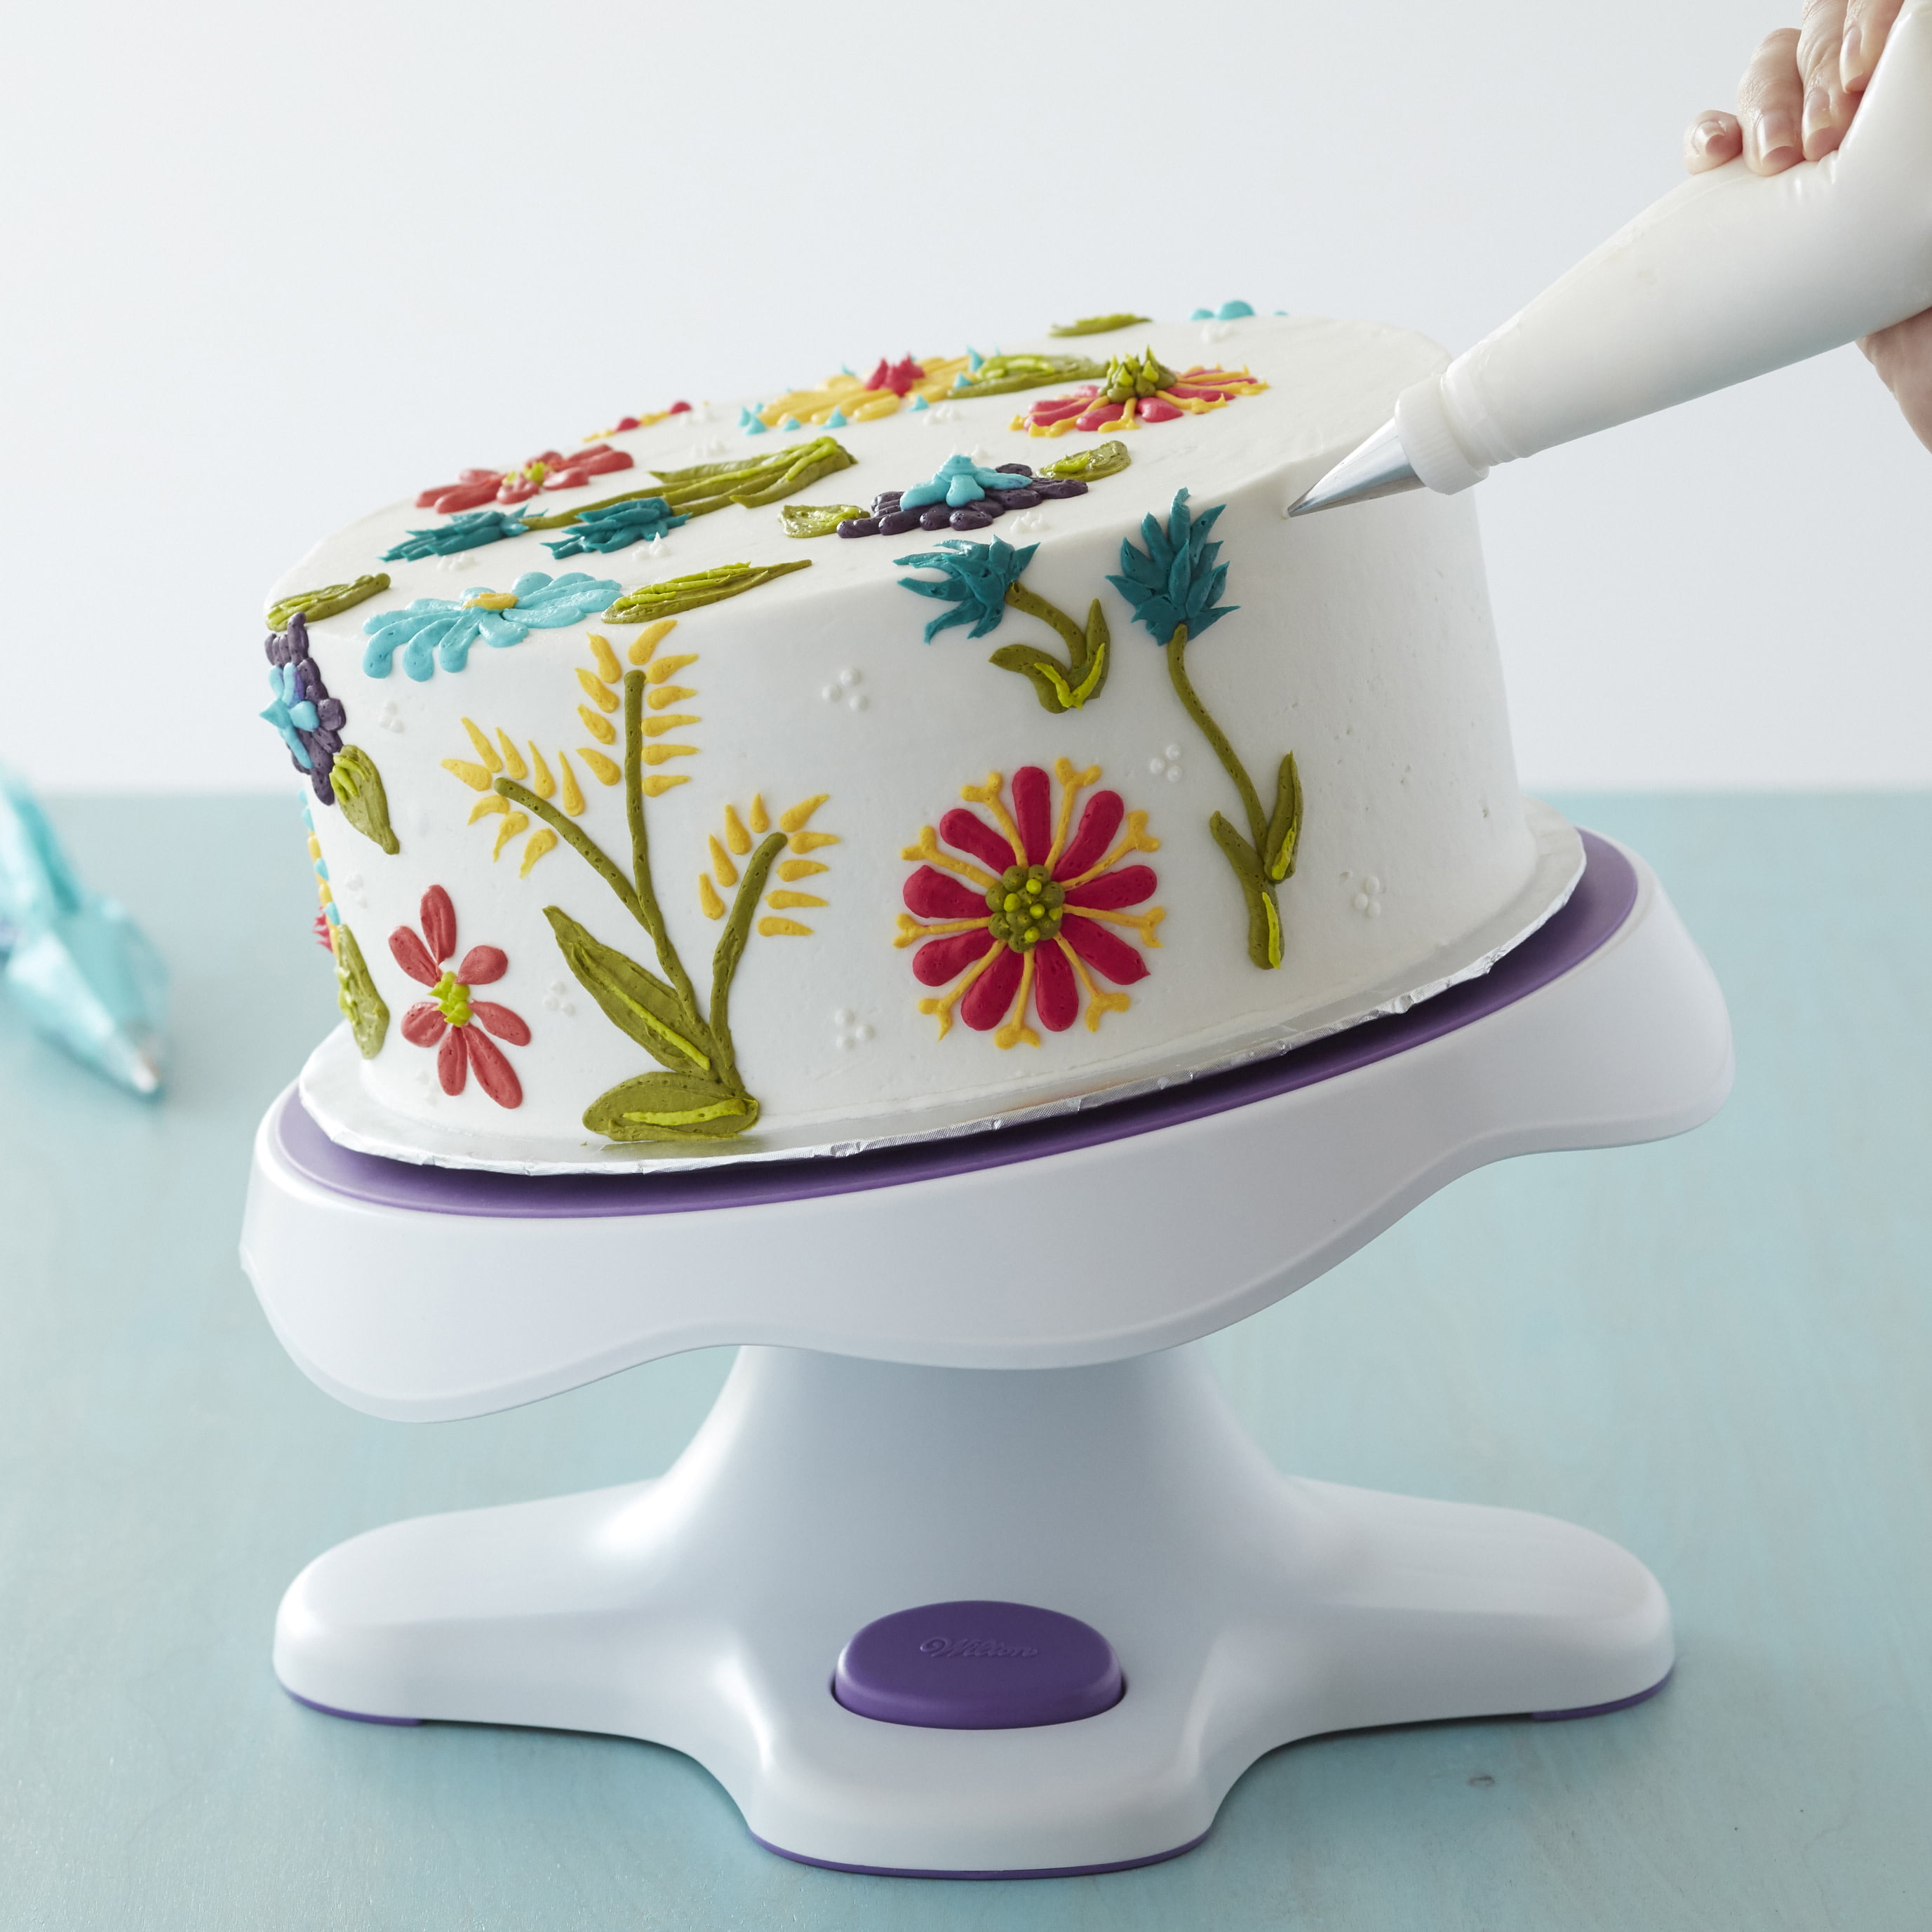 Wilton 2-in-1 Pedestal Cake Stand and Serving Plate, 10-Inch Round Stand -  Walmart.com